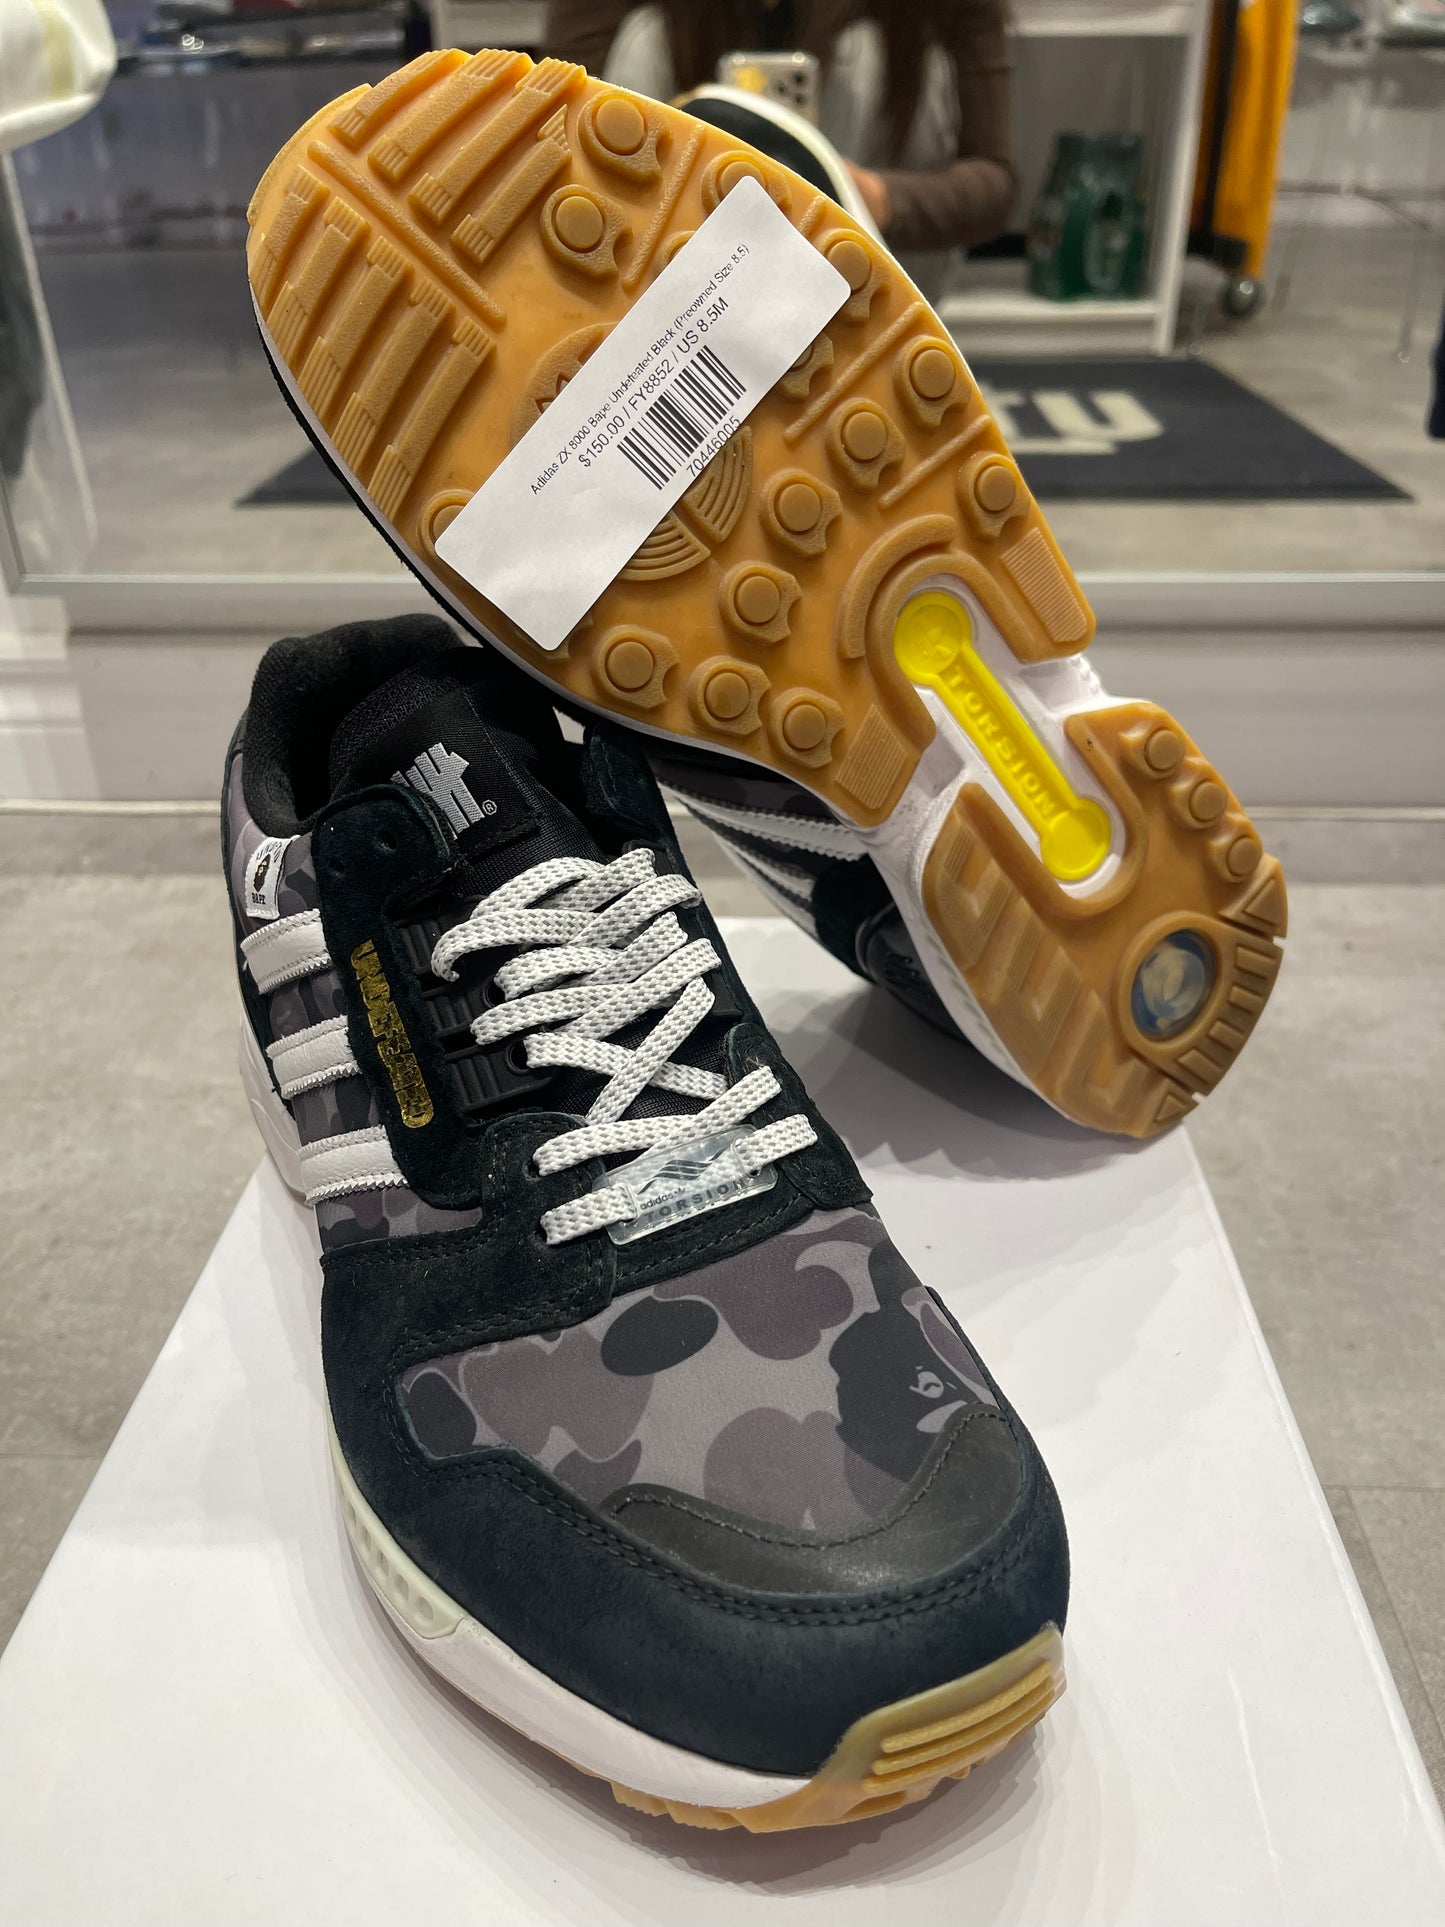 Adidas ZX 8000 Bape Undefeated Black (Preowned Size 8.5)